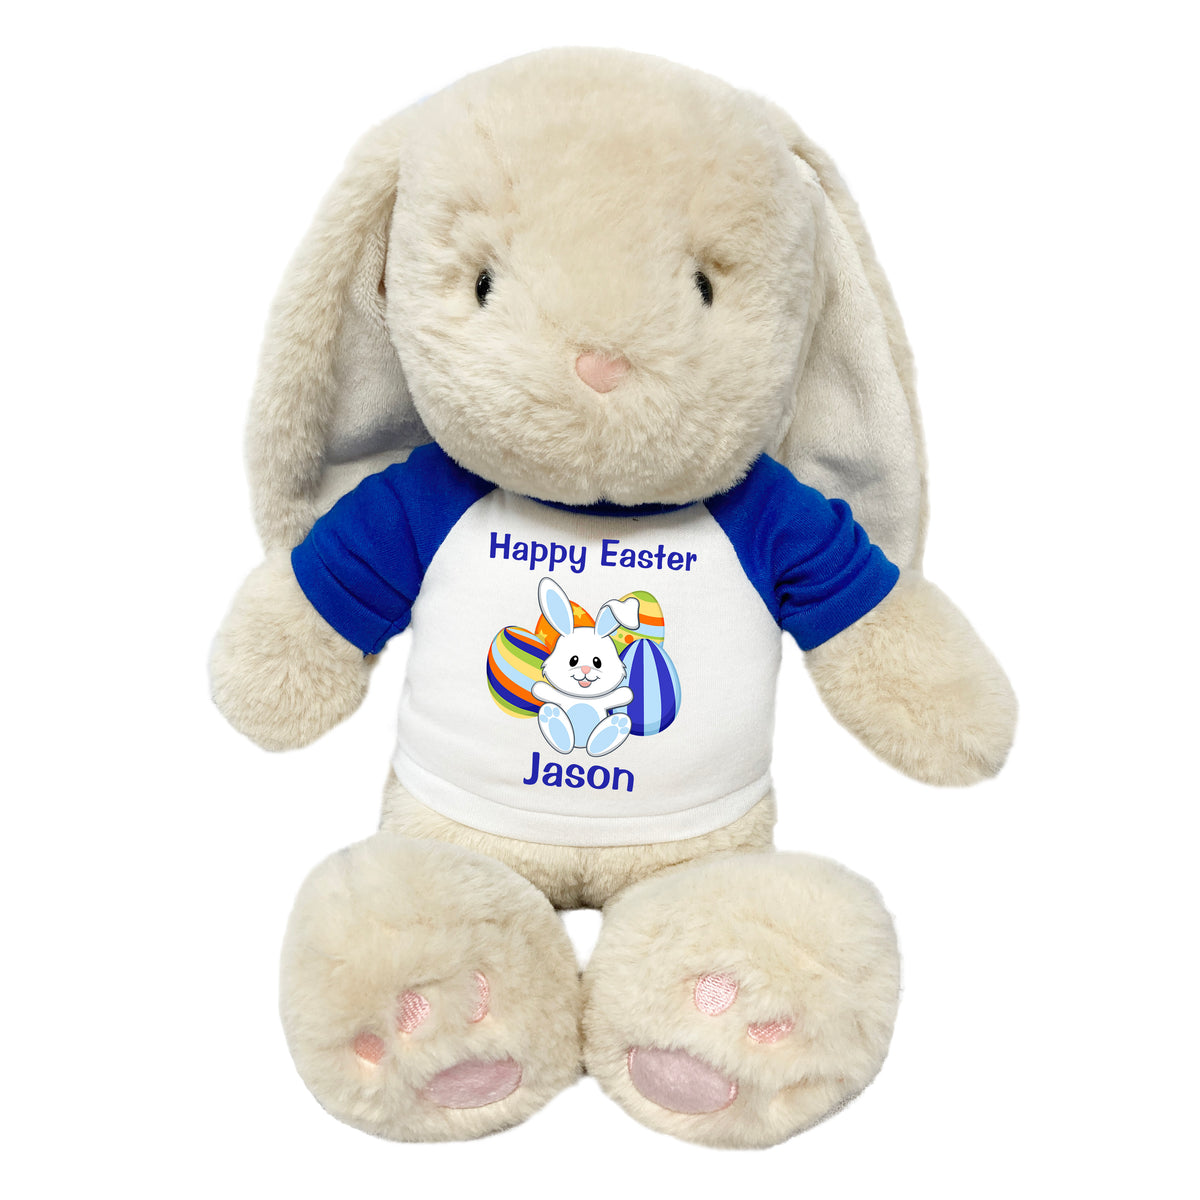 Personalized Easter Bunny - 14" Plush Creme Brulee Bunny Rabbit with Easter Egg Design - Royal shirt